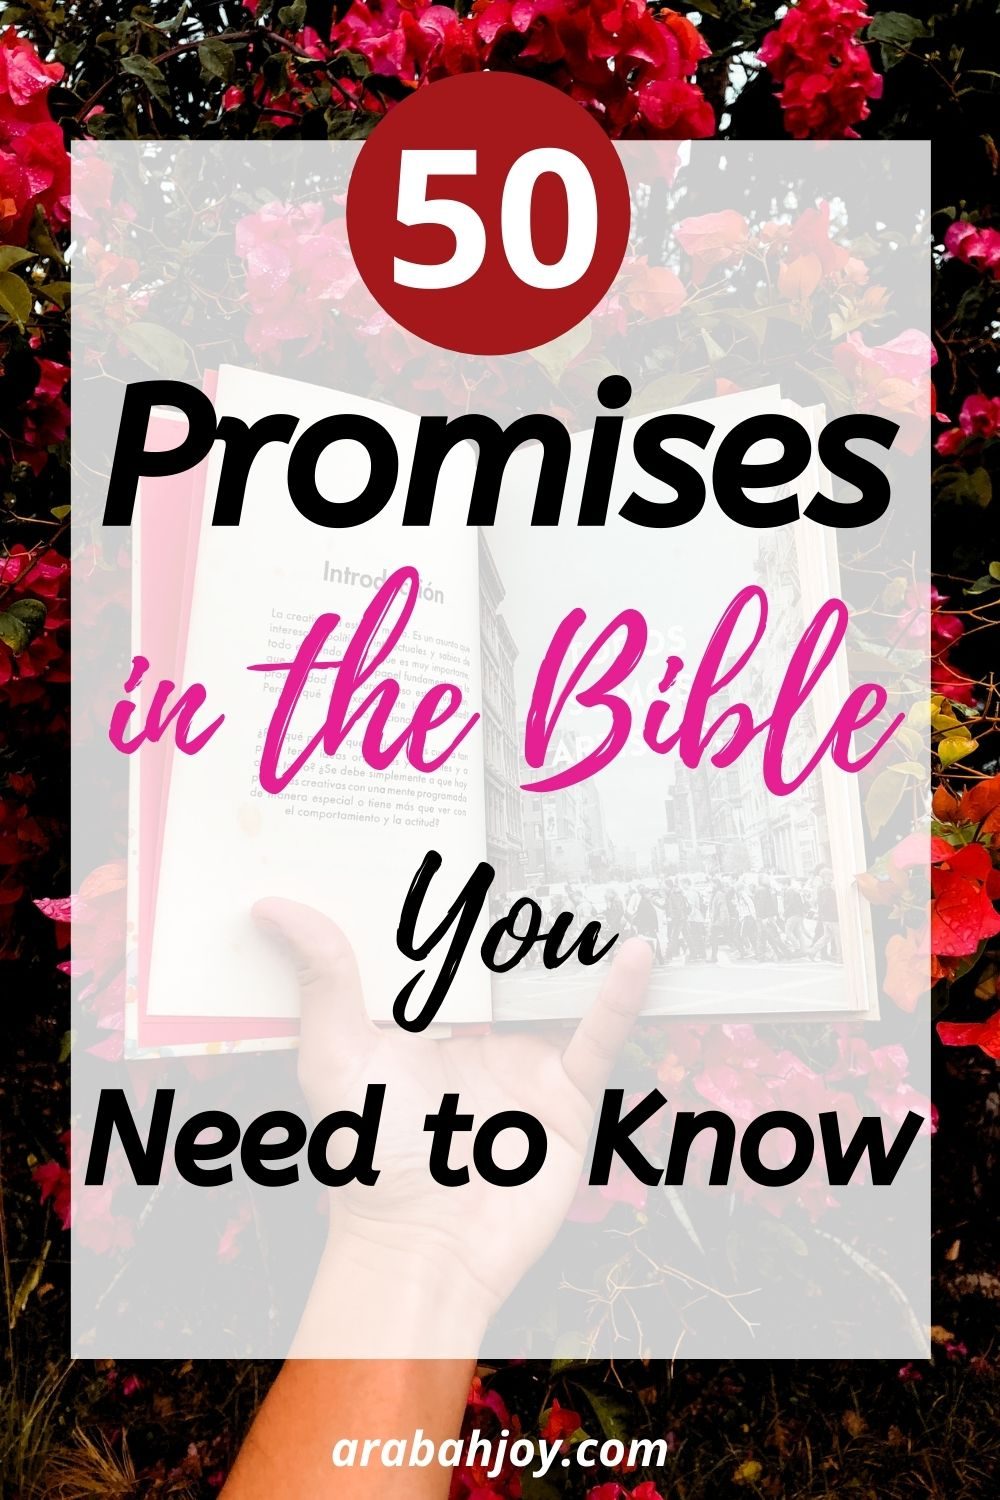 The promises of God can bring strength and comfort to our hearts. Here are 50 of God